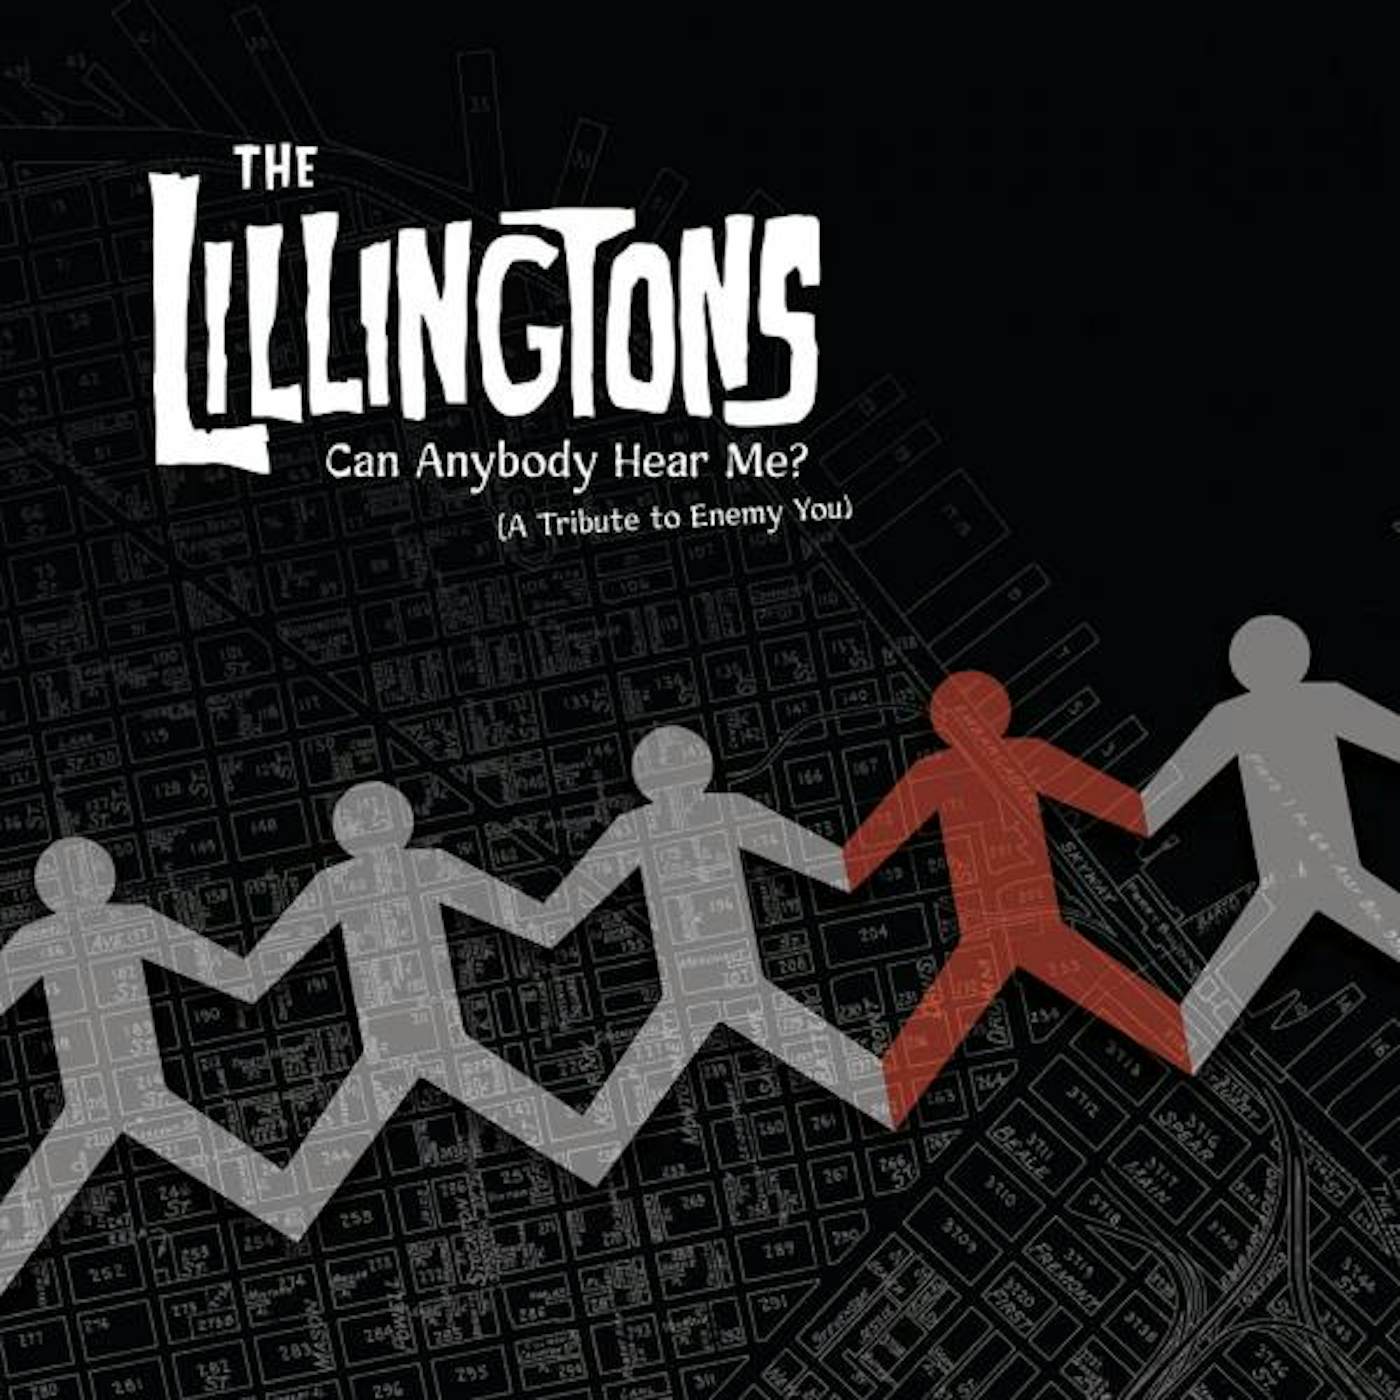 The Lillingtons CAN ANYBODY HEAR ME? (A TRIBUTE TO ENEMY YOU) CD